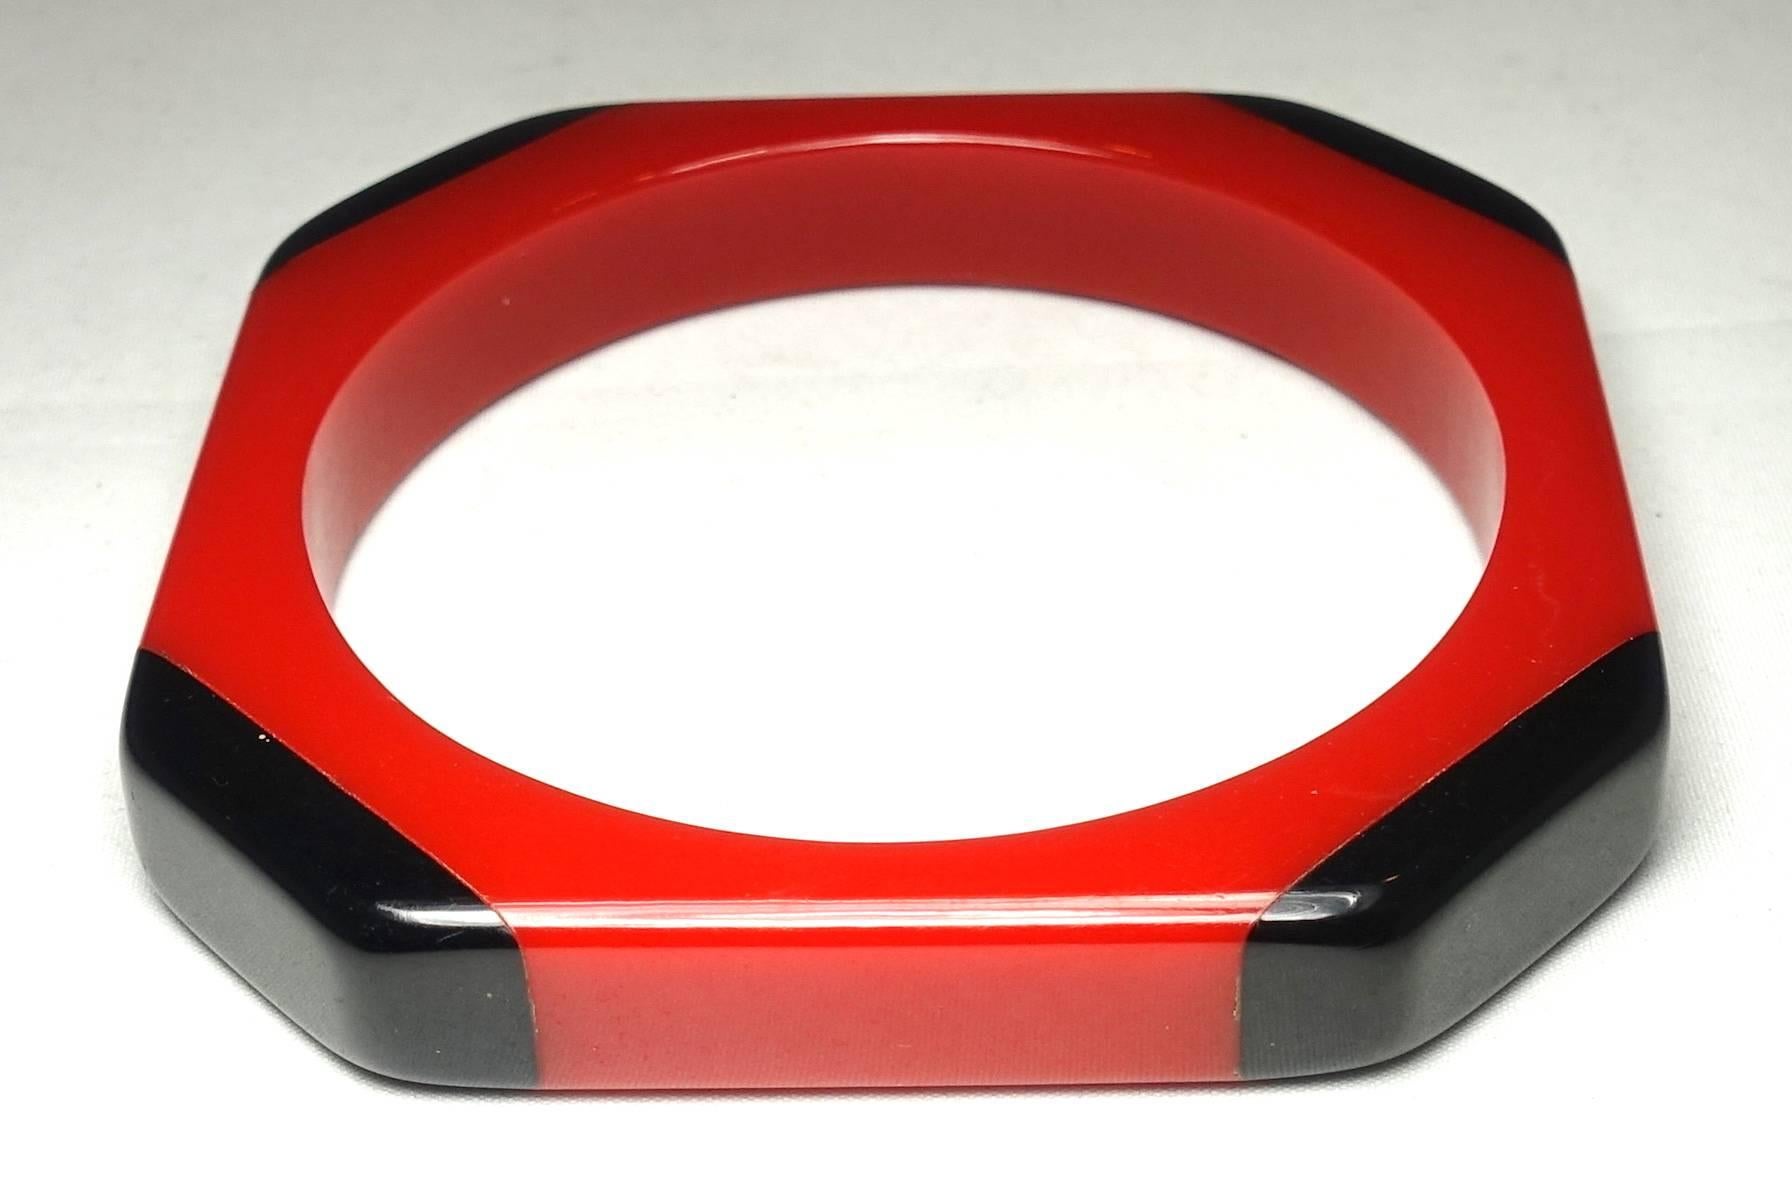 This 1940s vintage Bakelite bangle bracelet features a unique red & black design. In excellent condition, this highly collectible piece measures 3-1/4” x 1/2” and can fit up to a 7-1/2” wrist. 